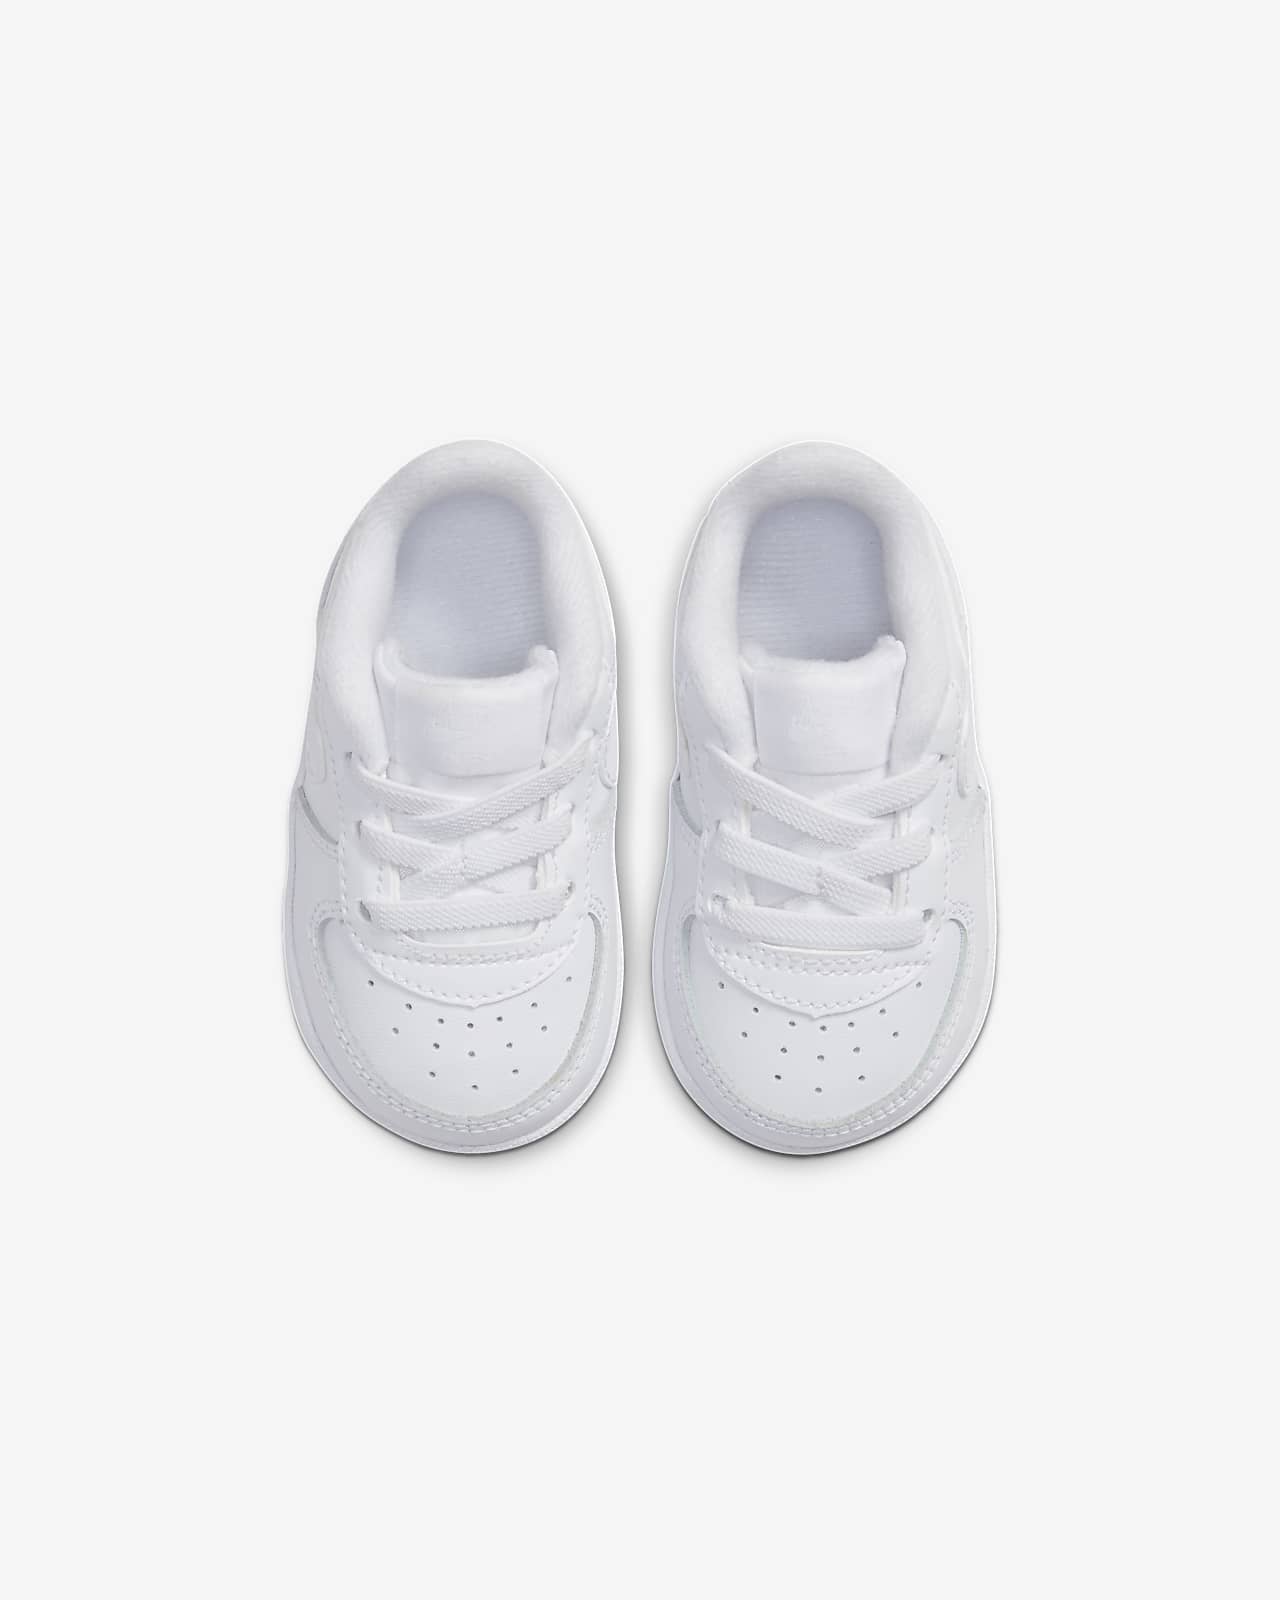 Nike Force 1 Cot Baby Bootie. Nike SG